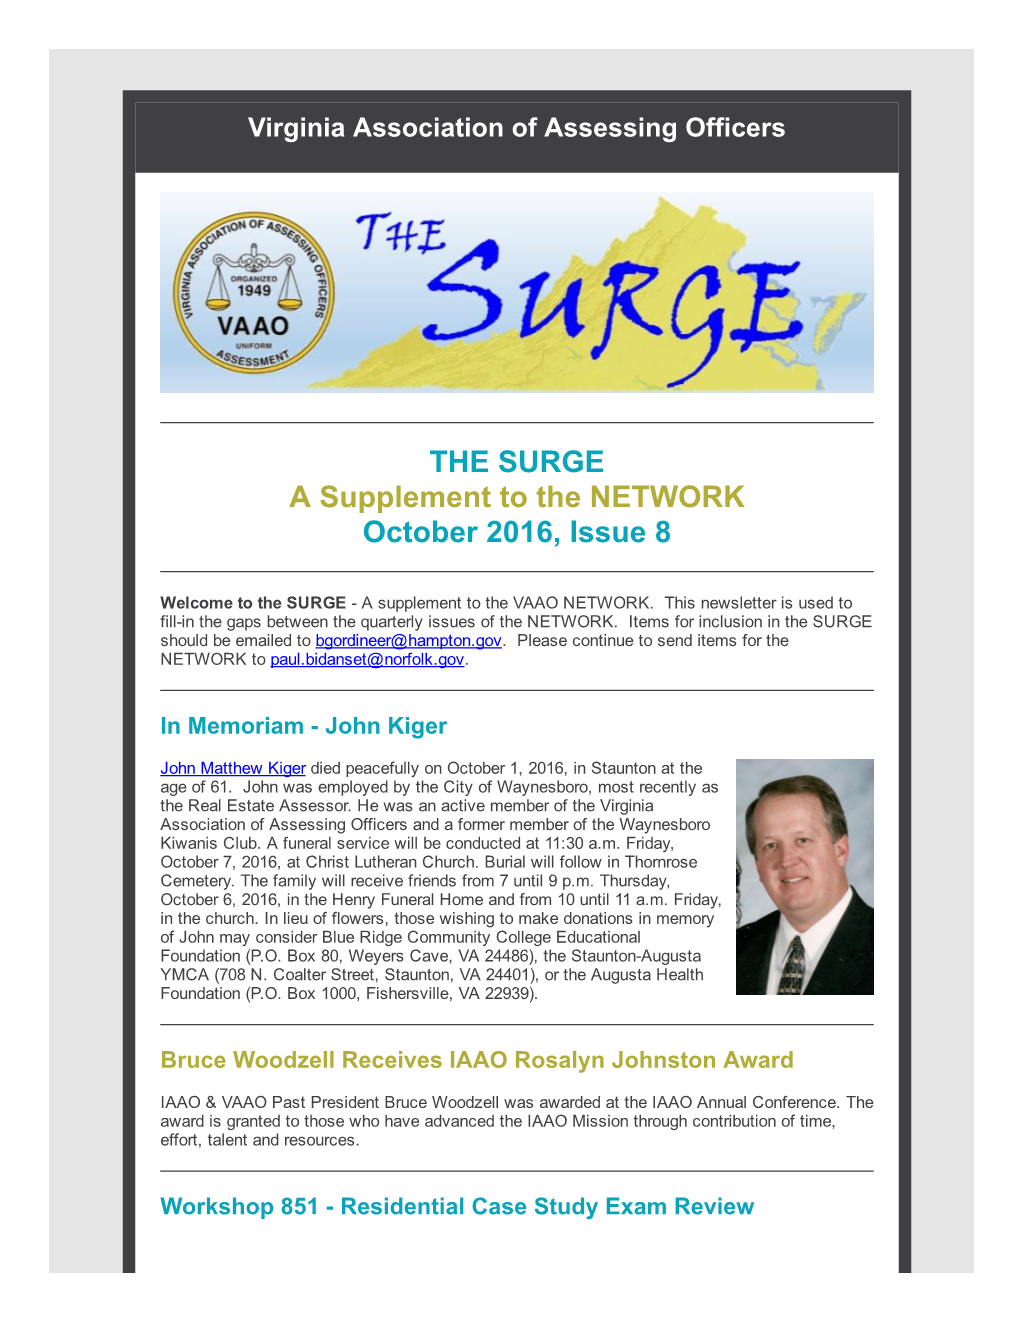 THE SURGE a Supplement to the NETWORK October 2016, Issue 8